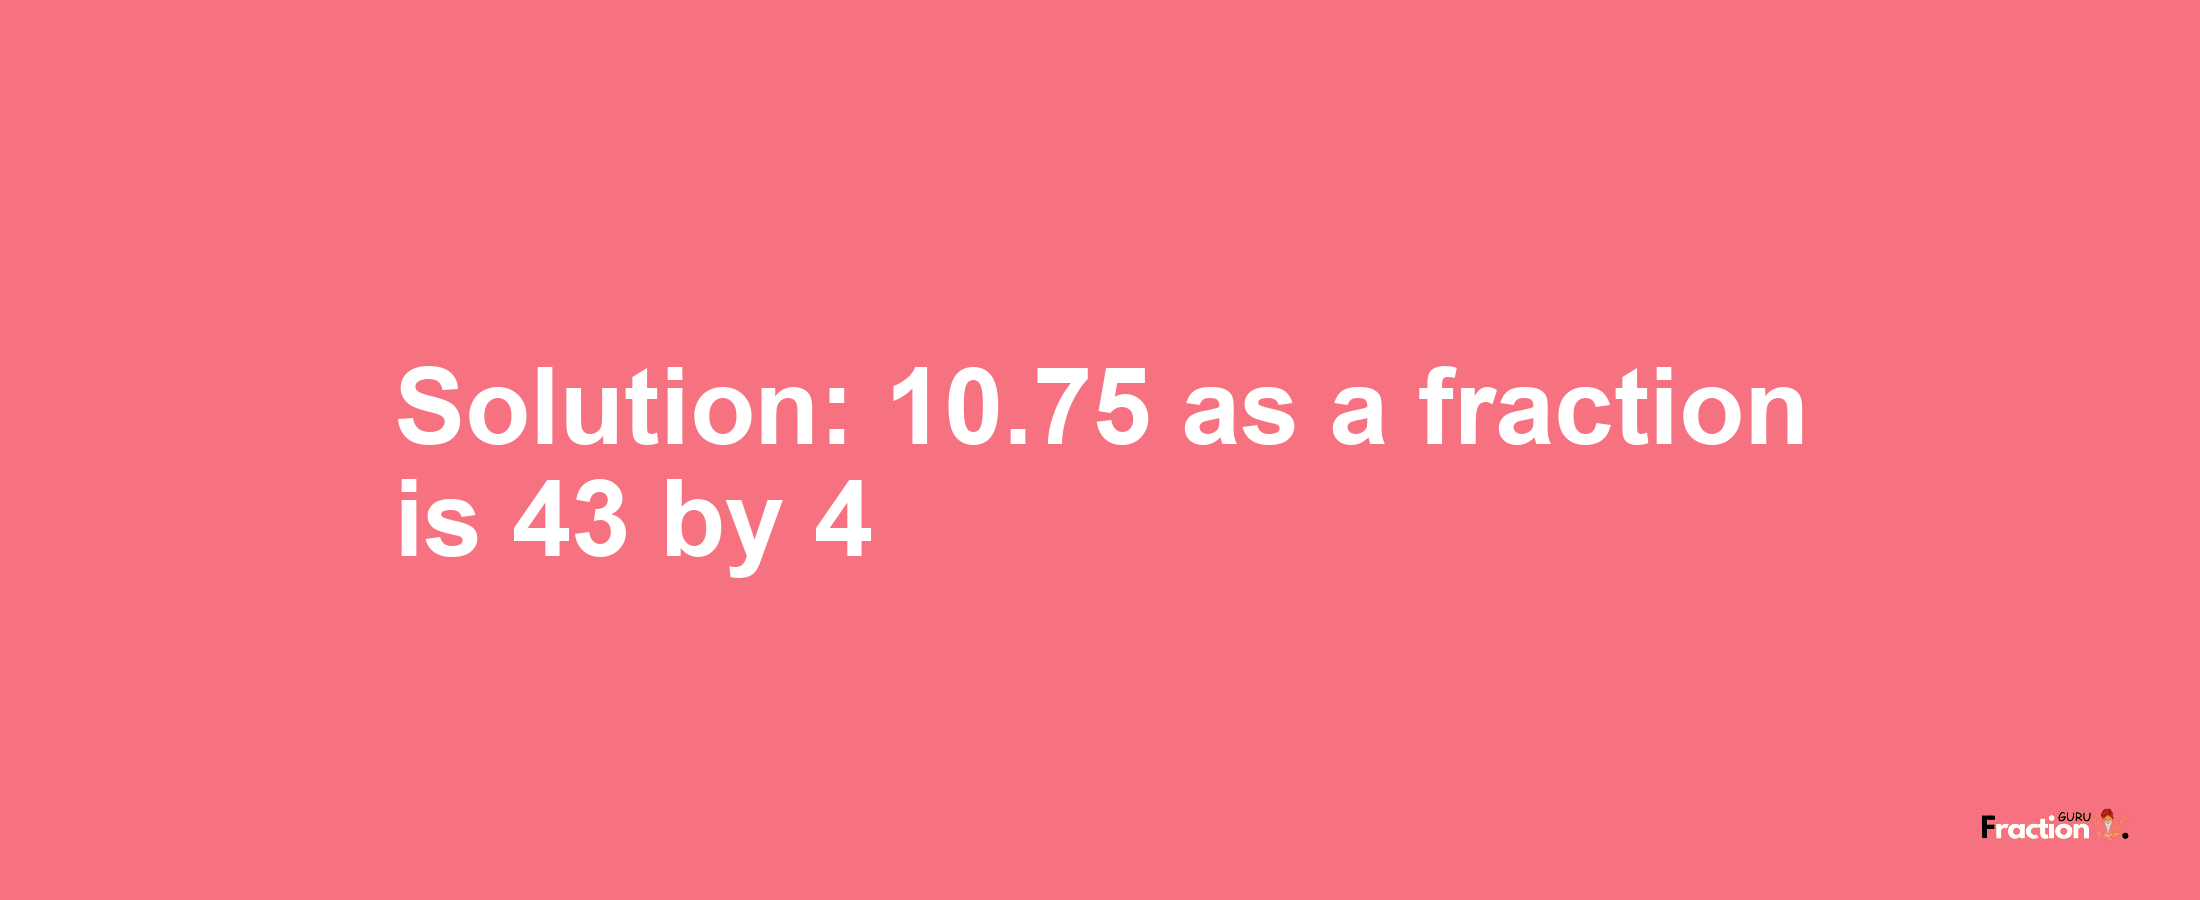 Solution:10.75 as a fraction is 43/4